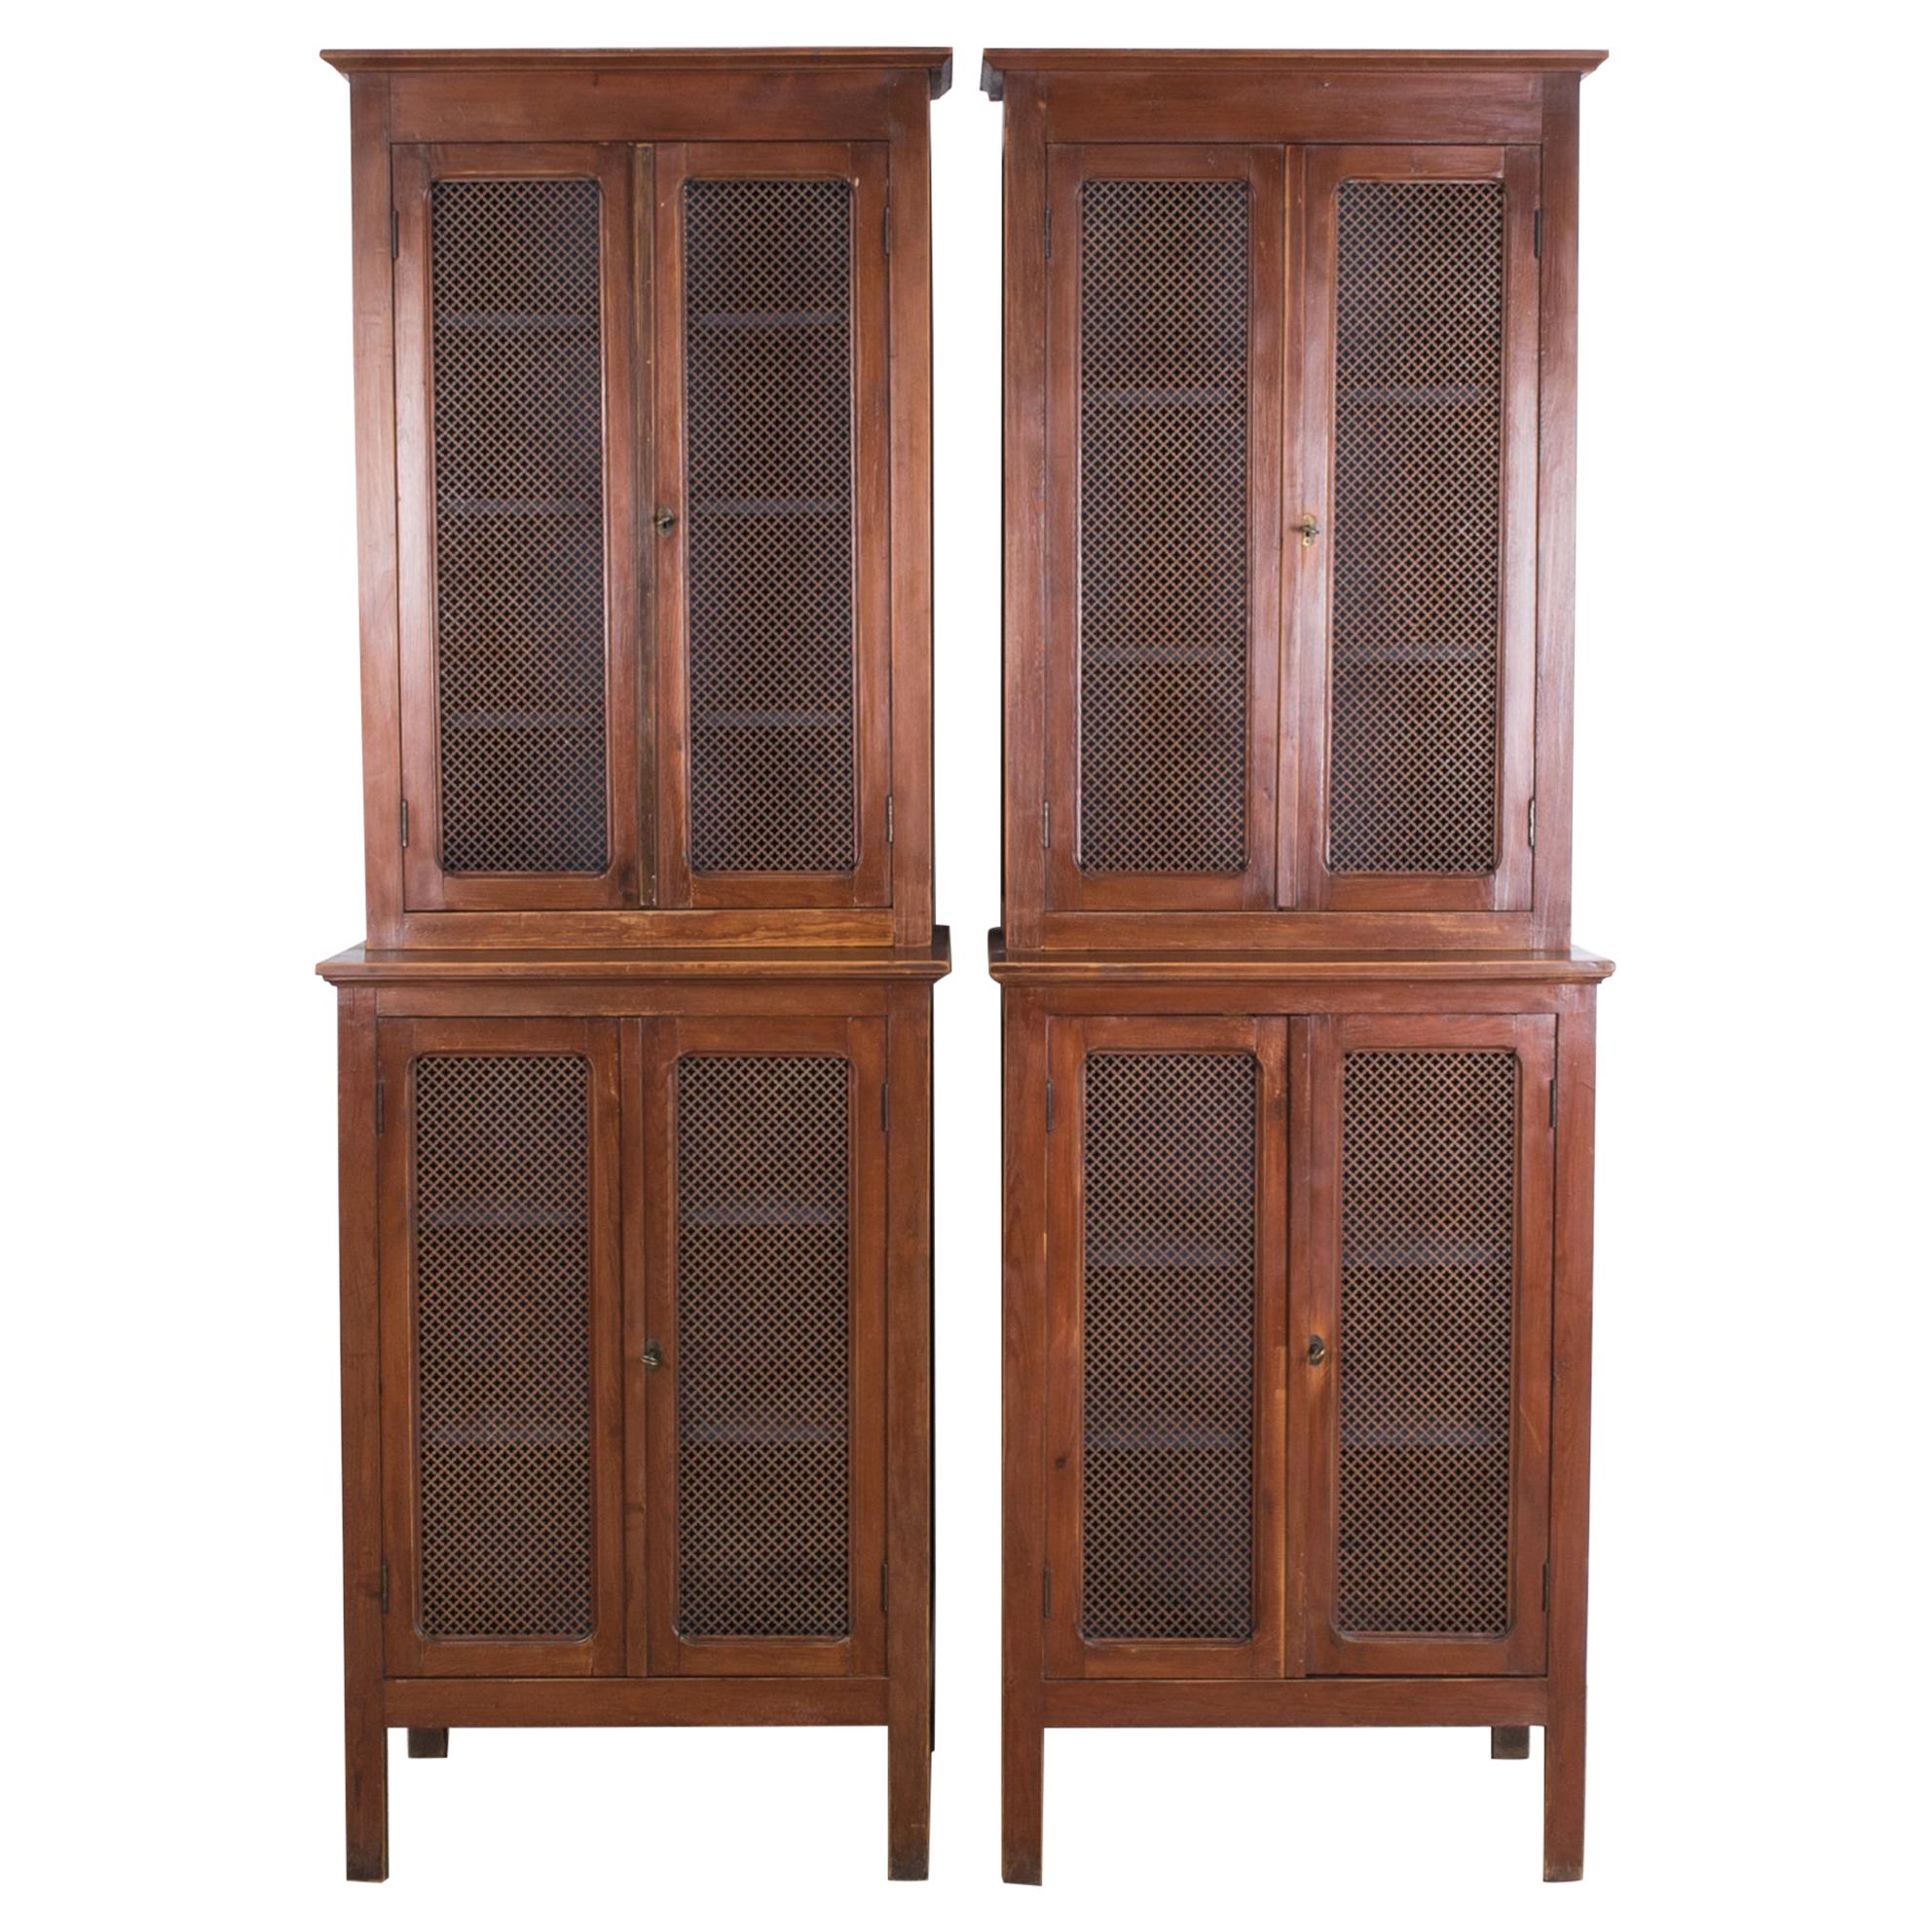 French Provincial Metal Mesh Pantry Cabinets, a Pair